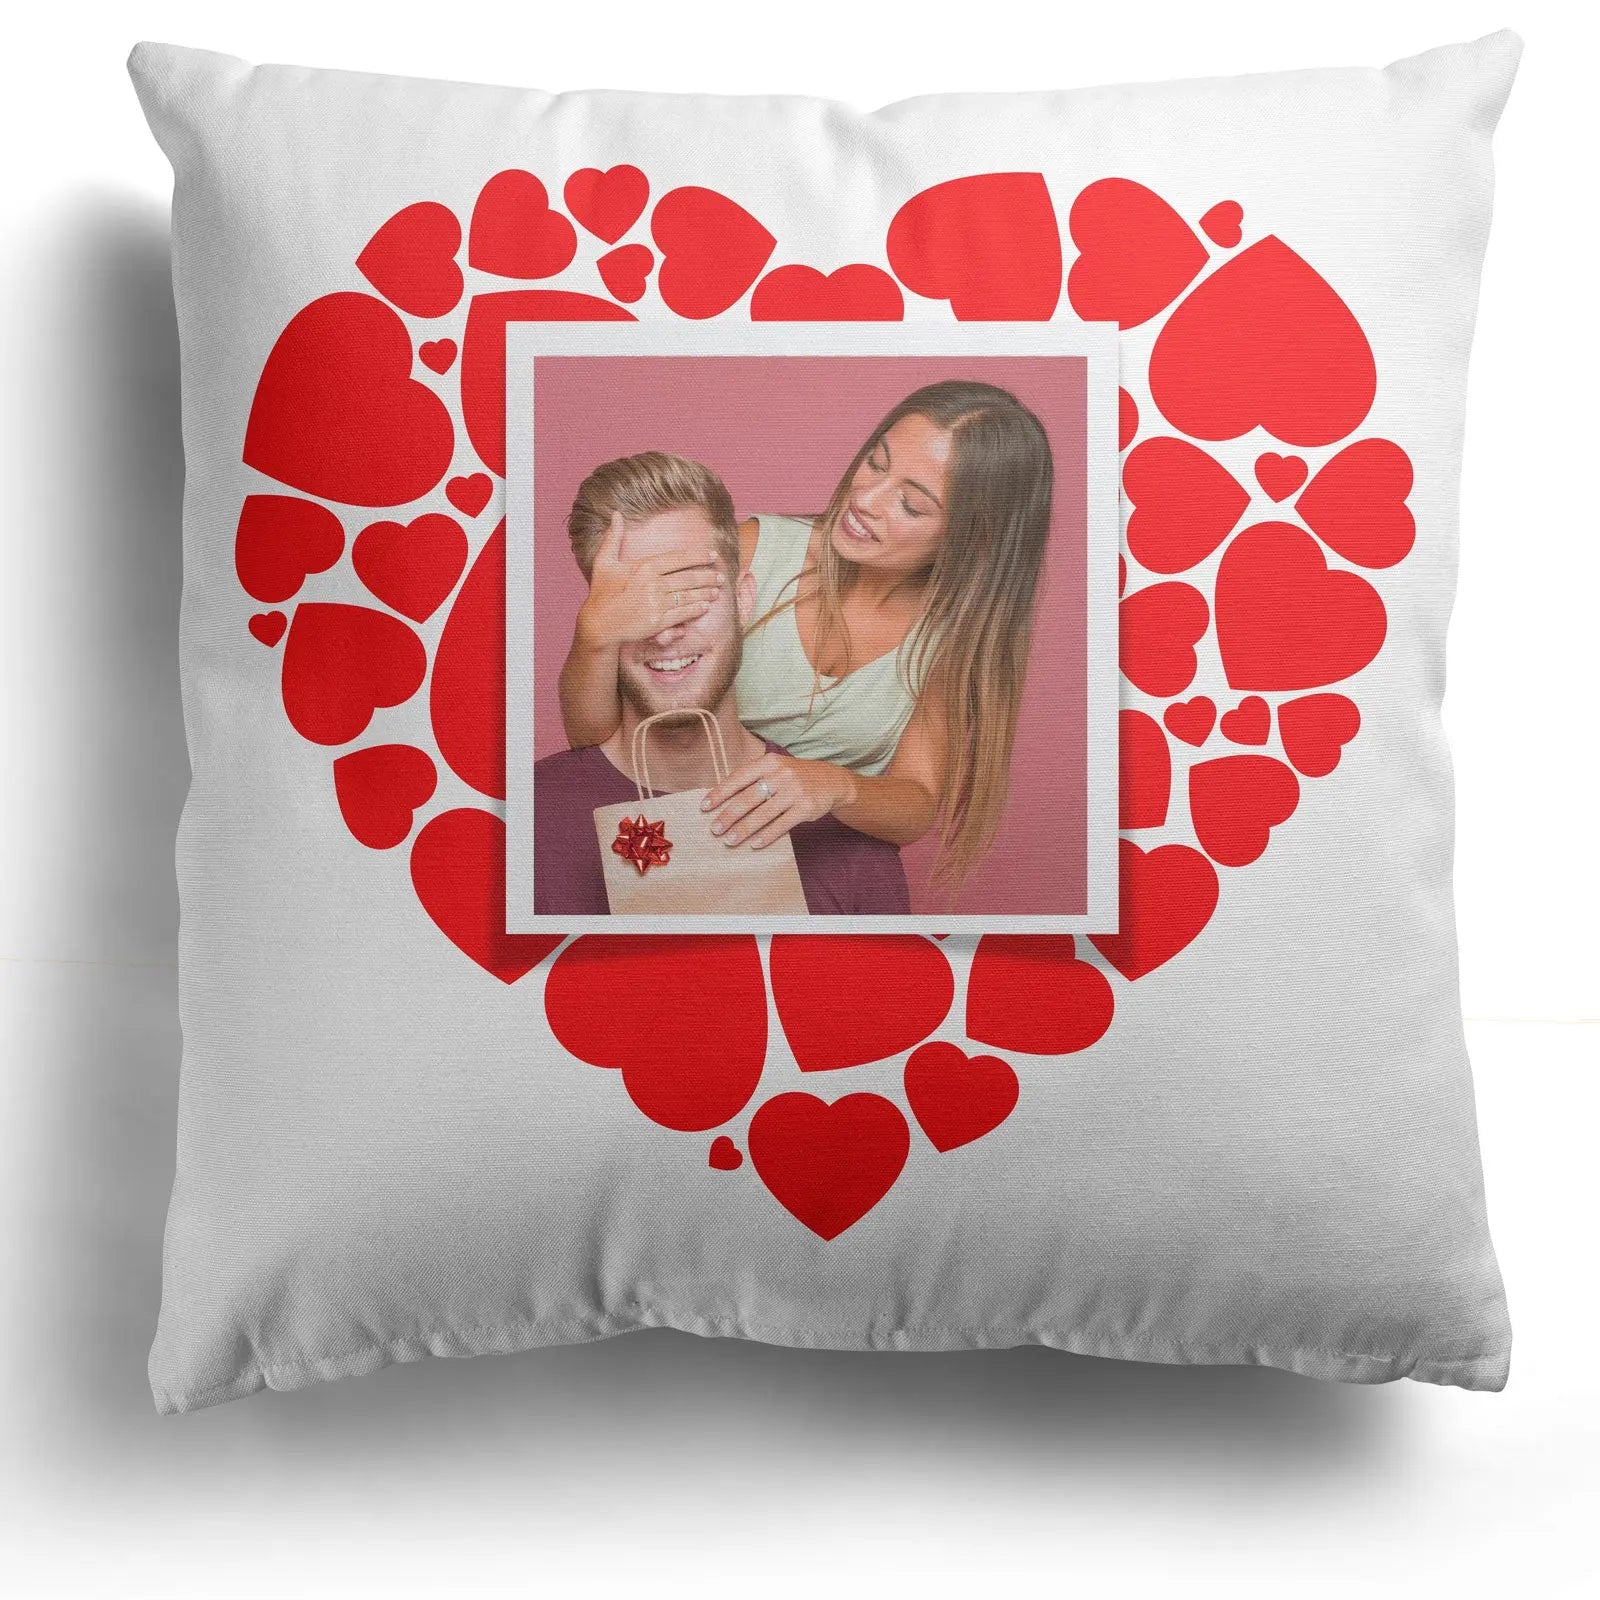 Personalised Cushion  Valentines Day  Couples & Romance  40x40cm  1 Image  Heart